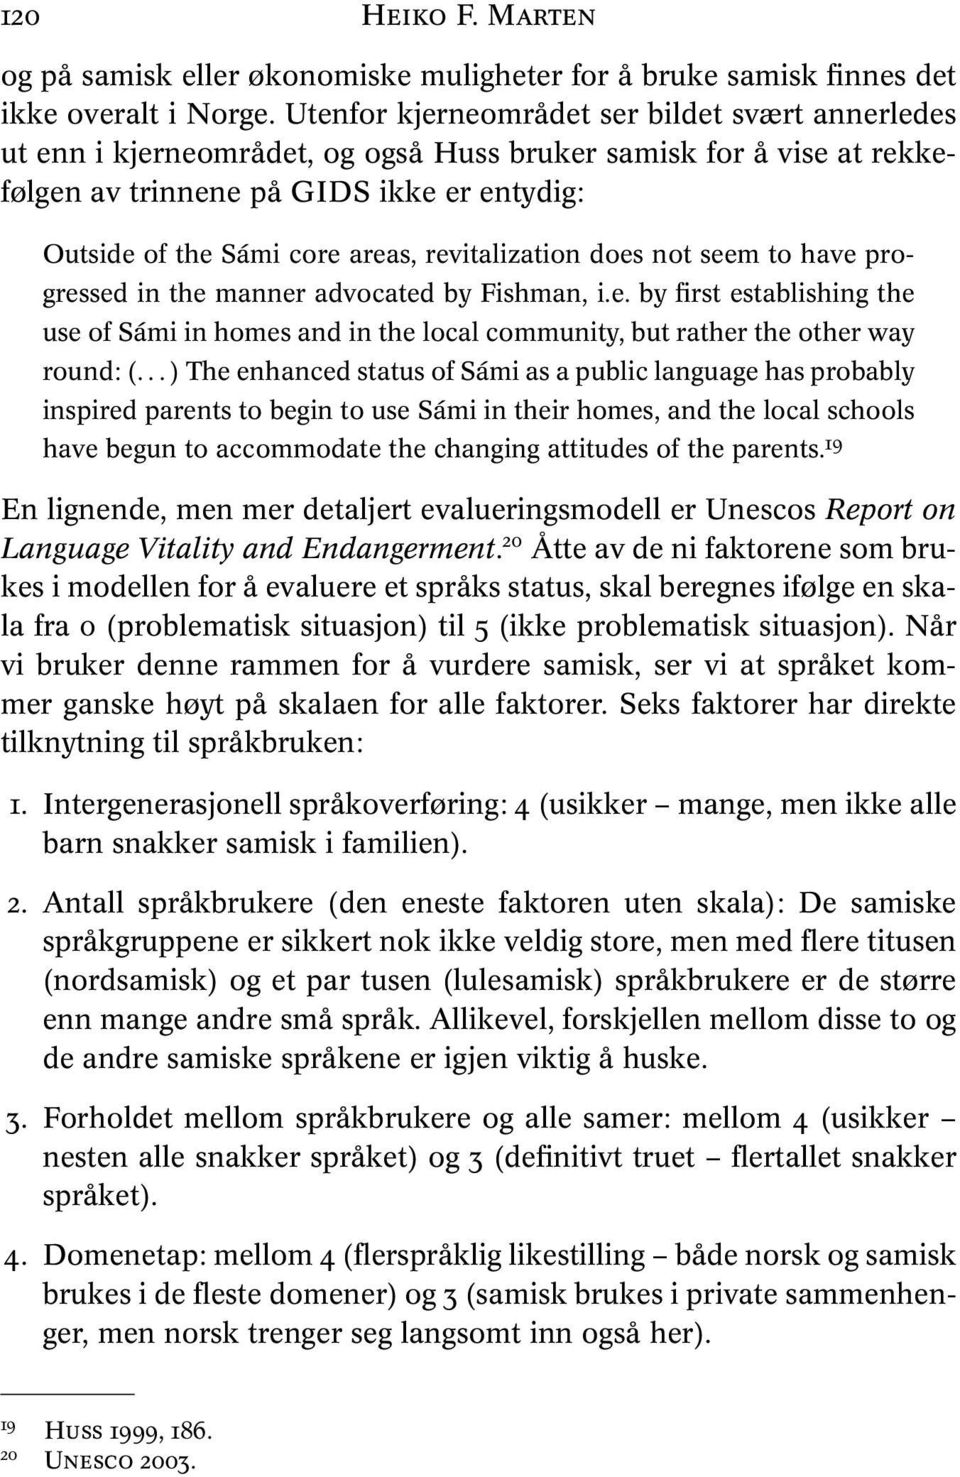 revitalization does not seem to have progressed in the manner advocated by Fishman, i.e. by first establishing the use of Sámi in homes and in the local community, but rather the other way round: (.